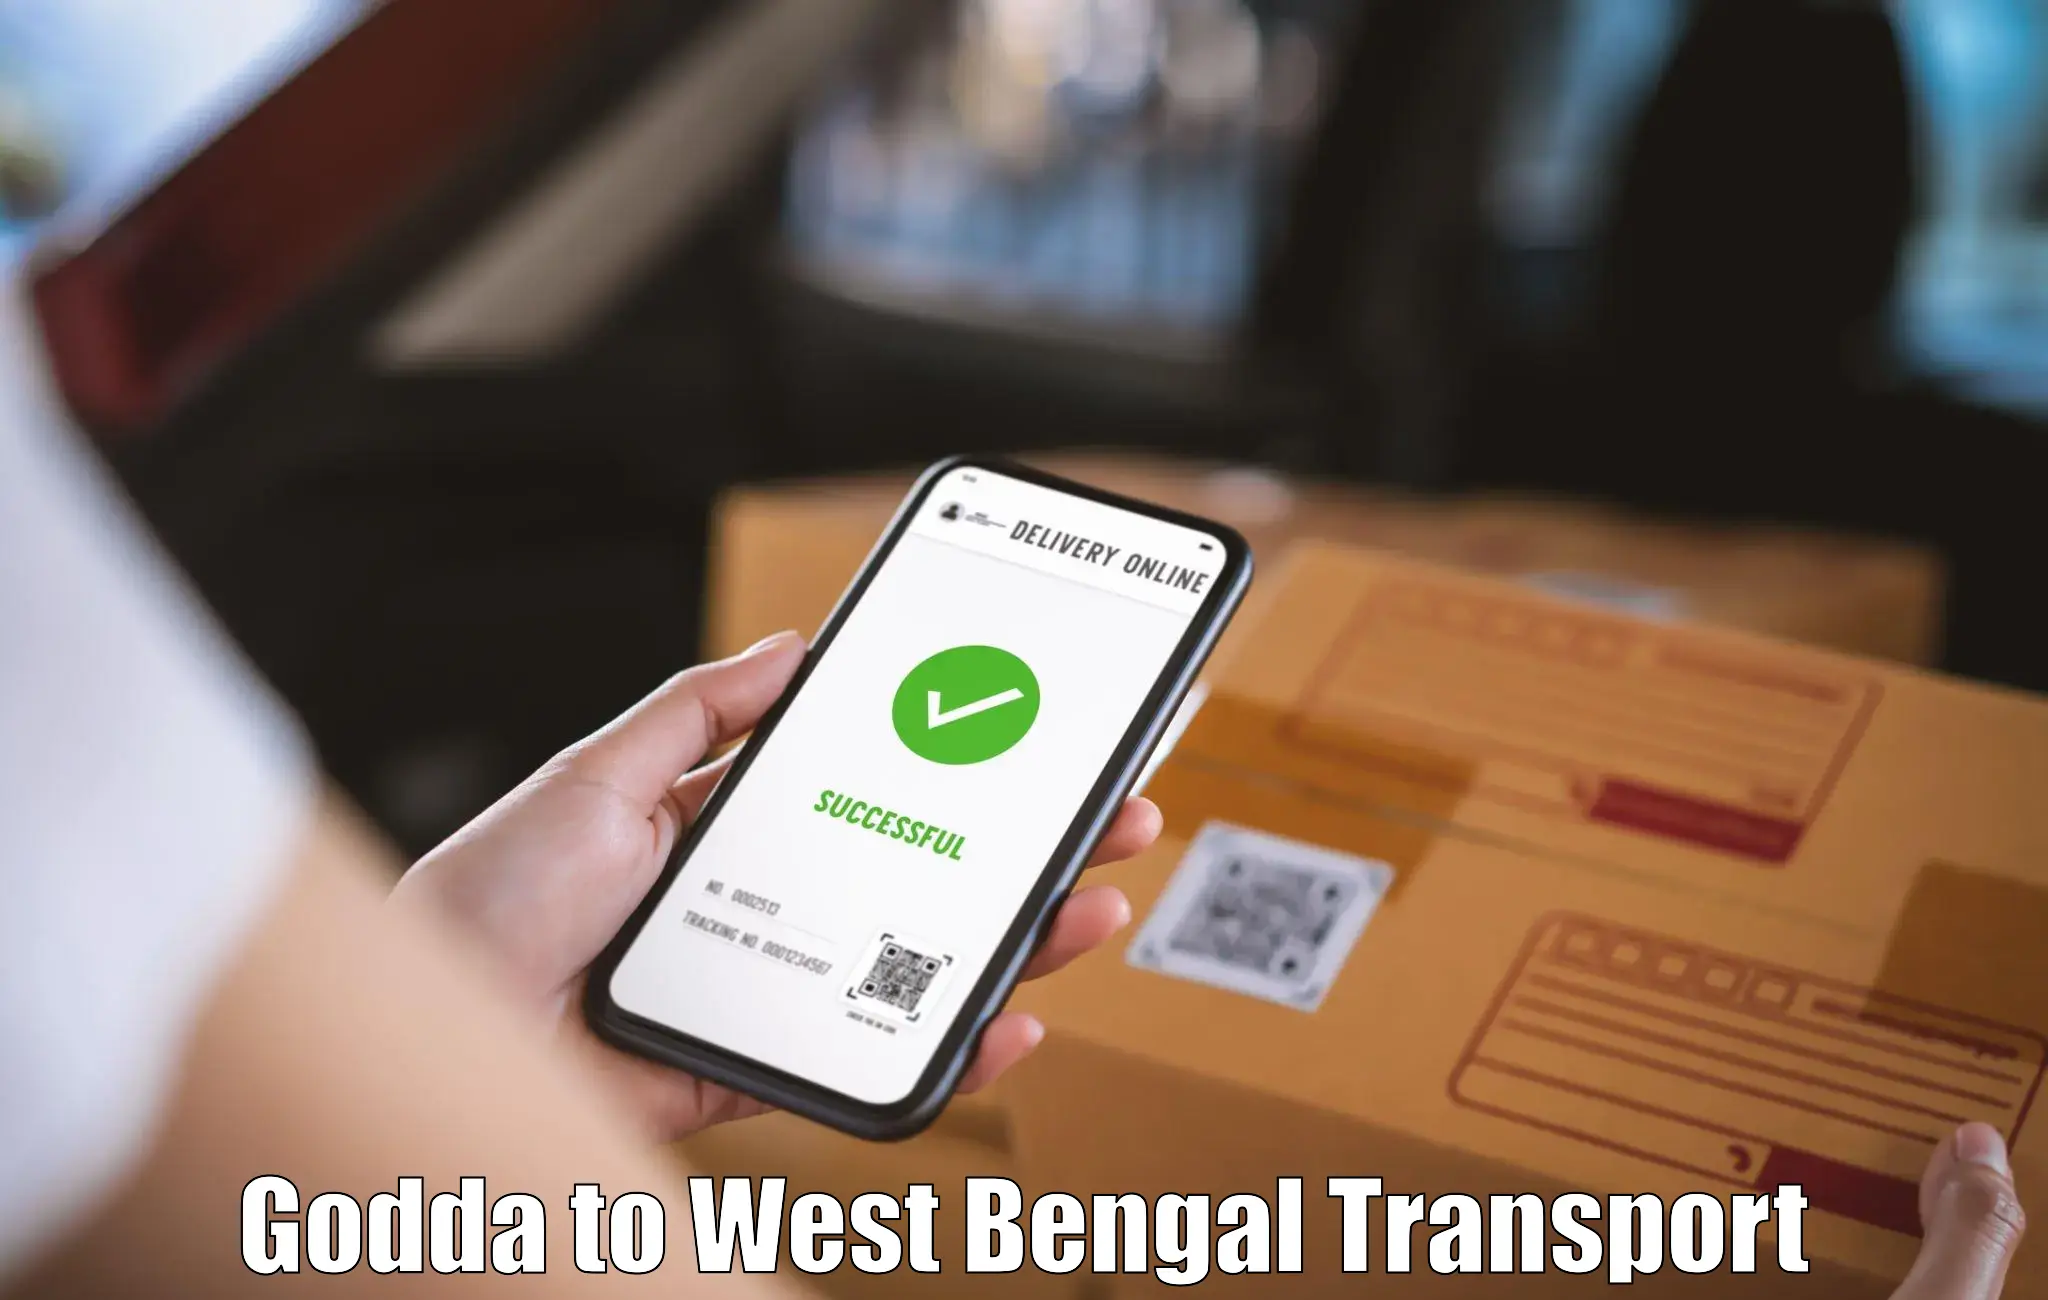 Online transport booking Godda to Midnapore